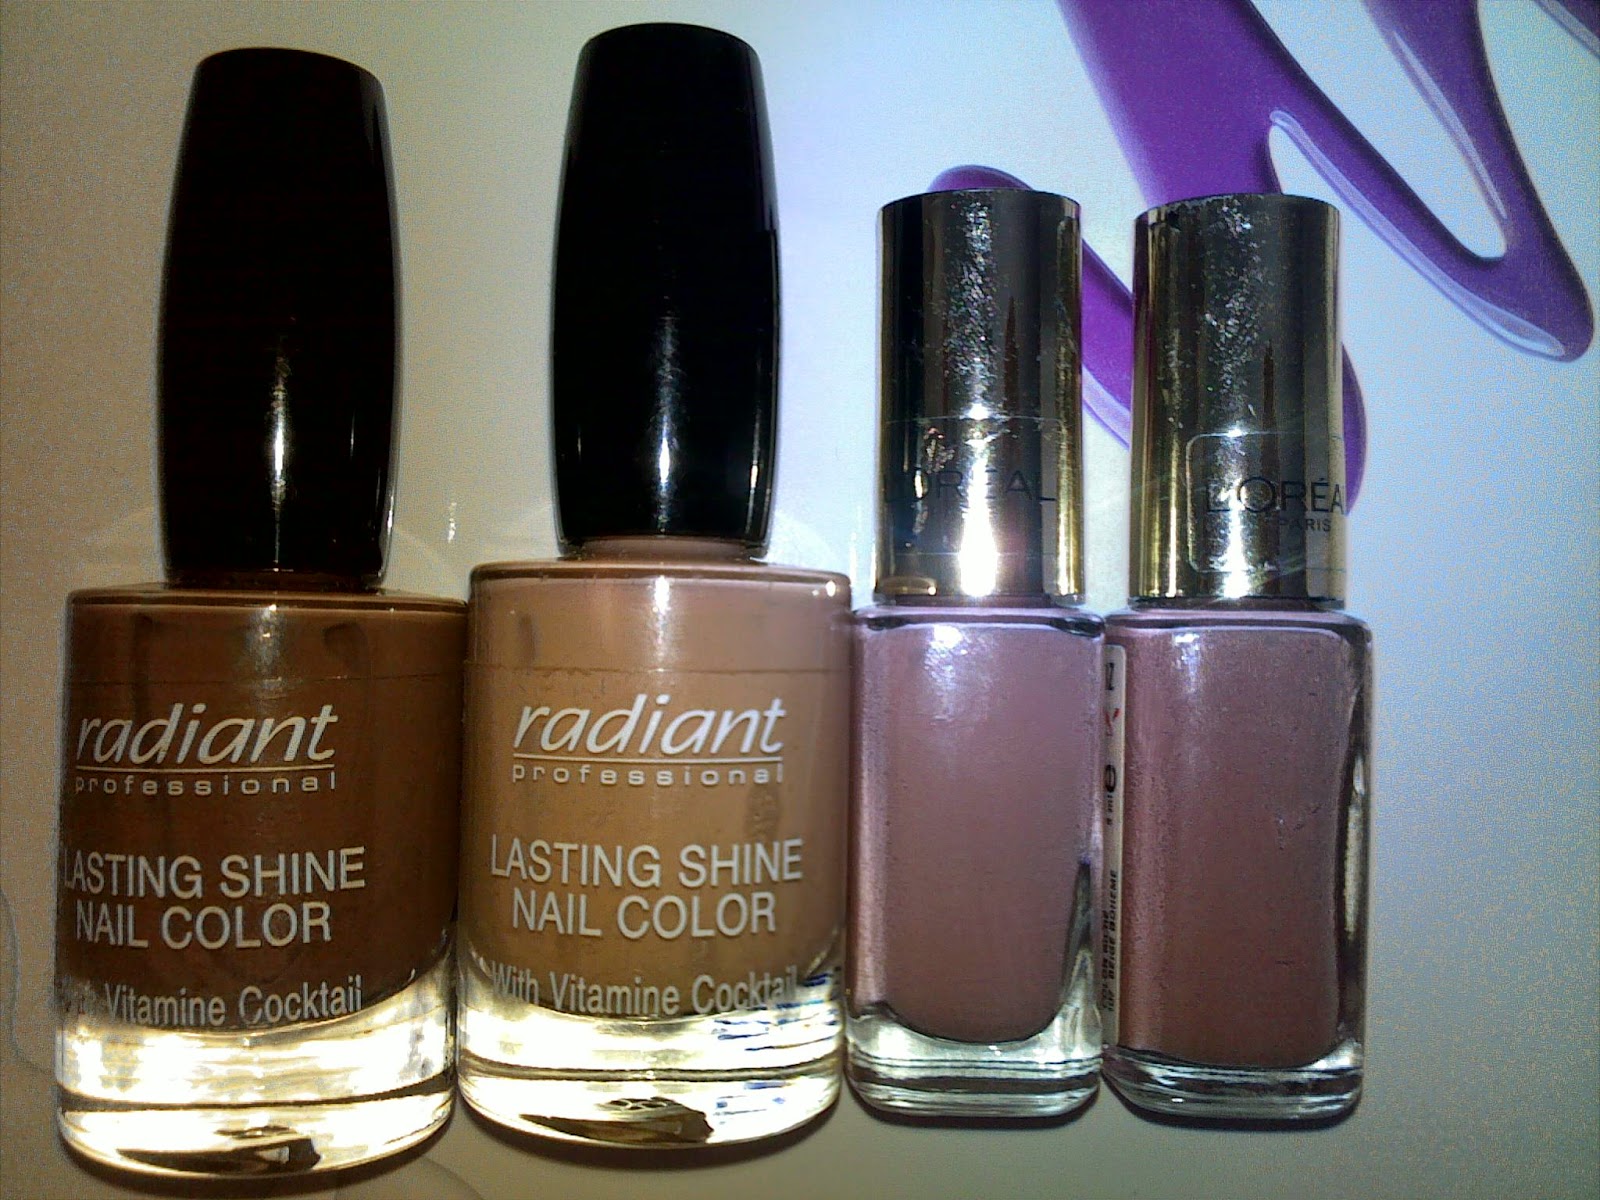 Nude nails, nail polishes from Radiant and L'oreal